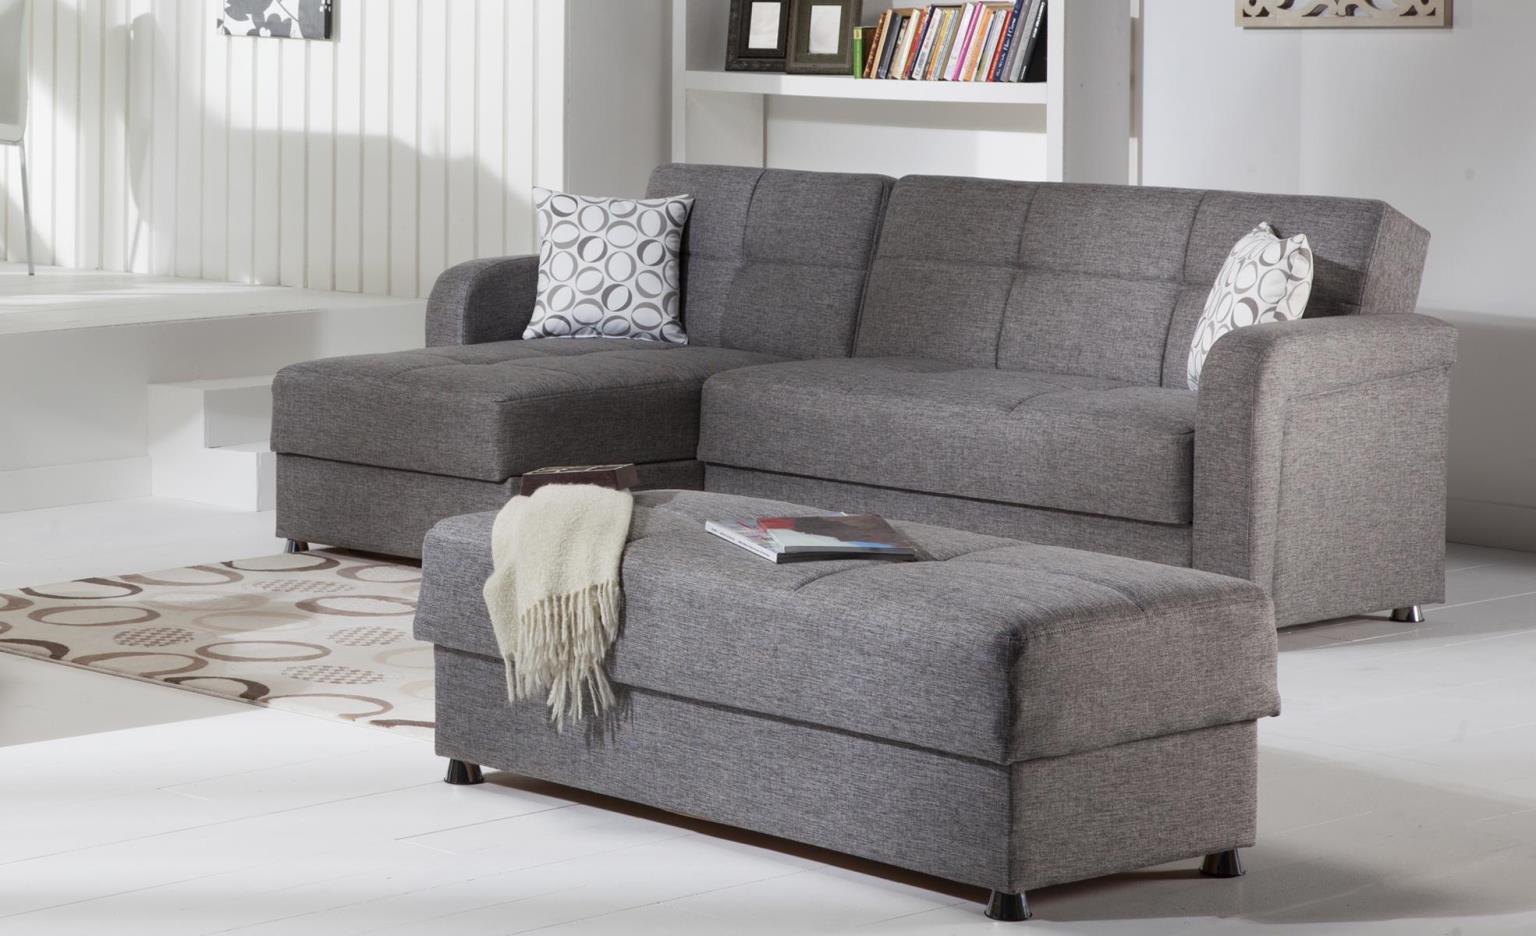 VISION SECTIONAL - Berre Furniture